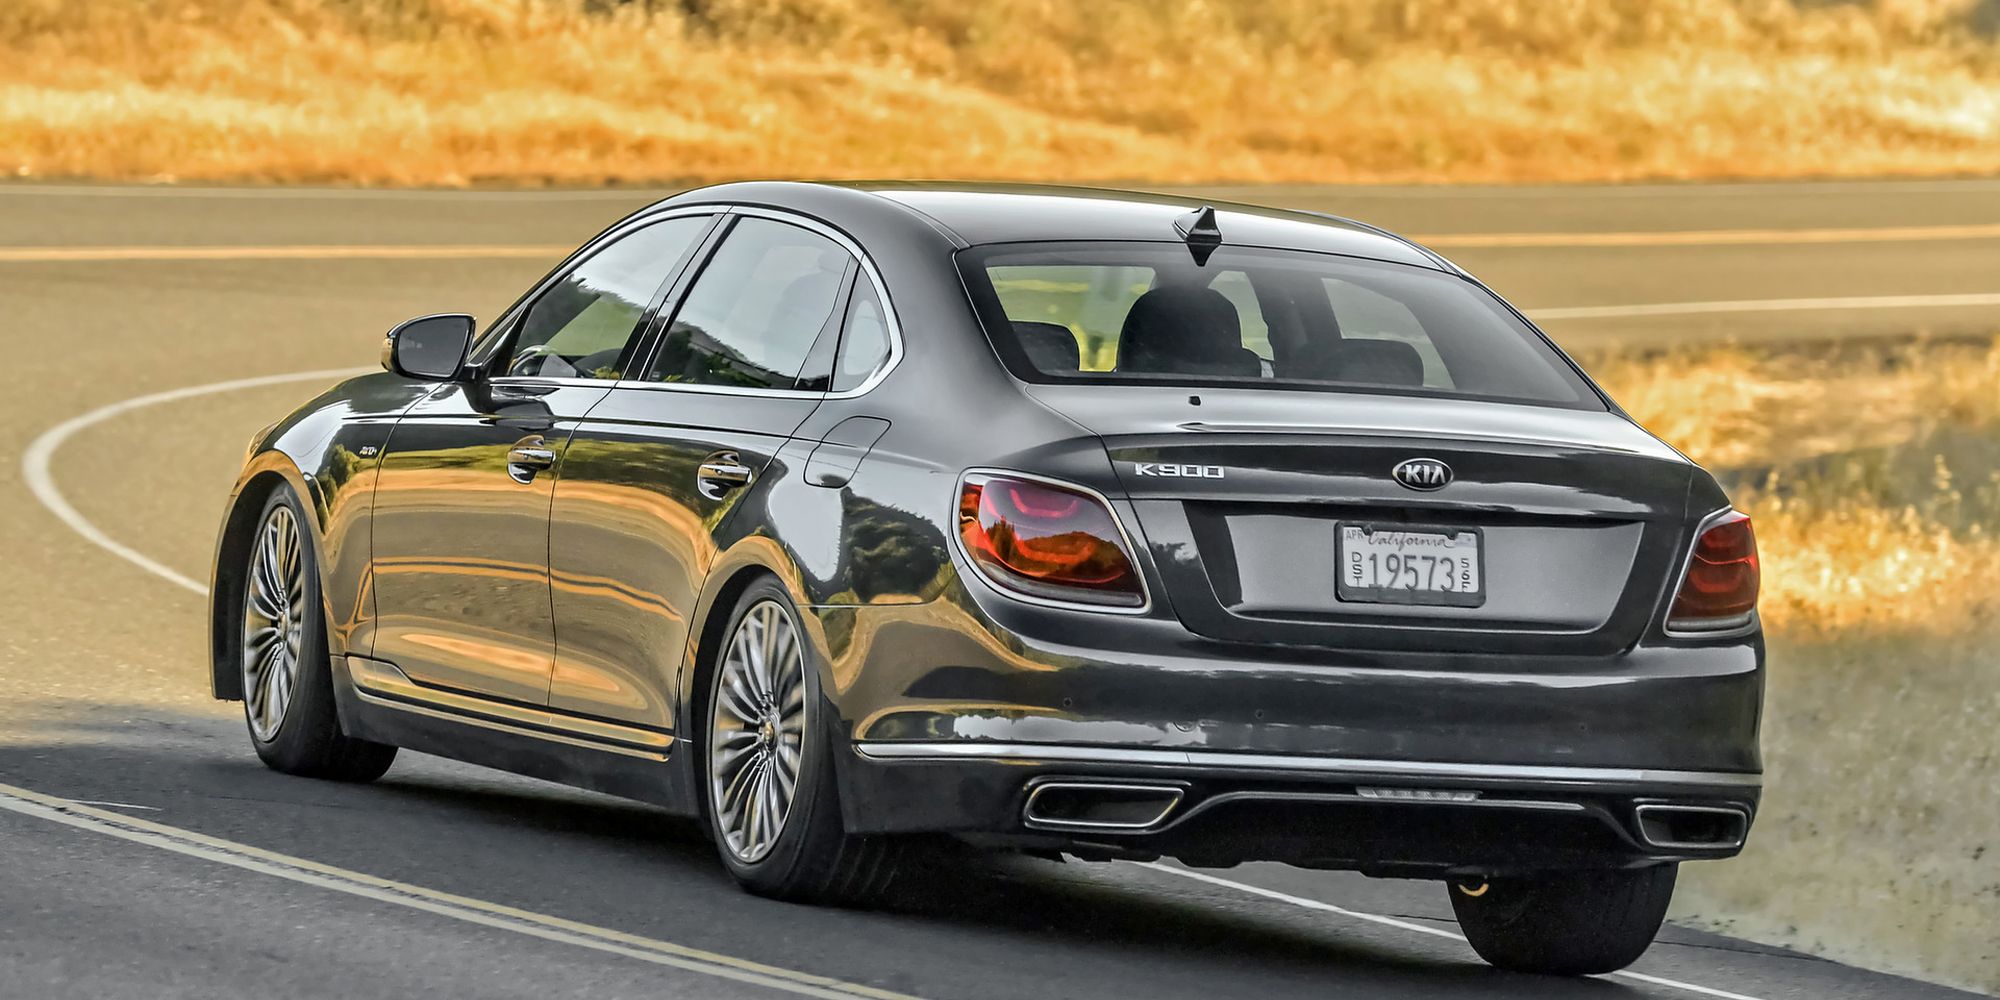 The rear of the second gen K900